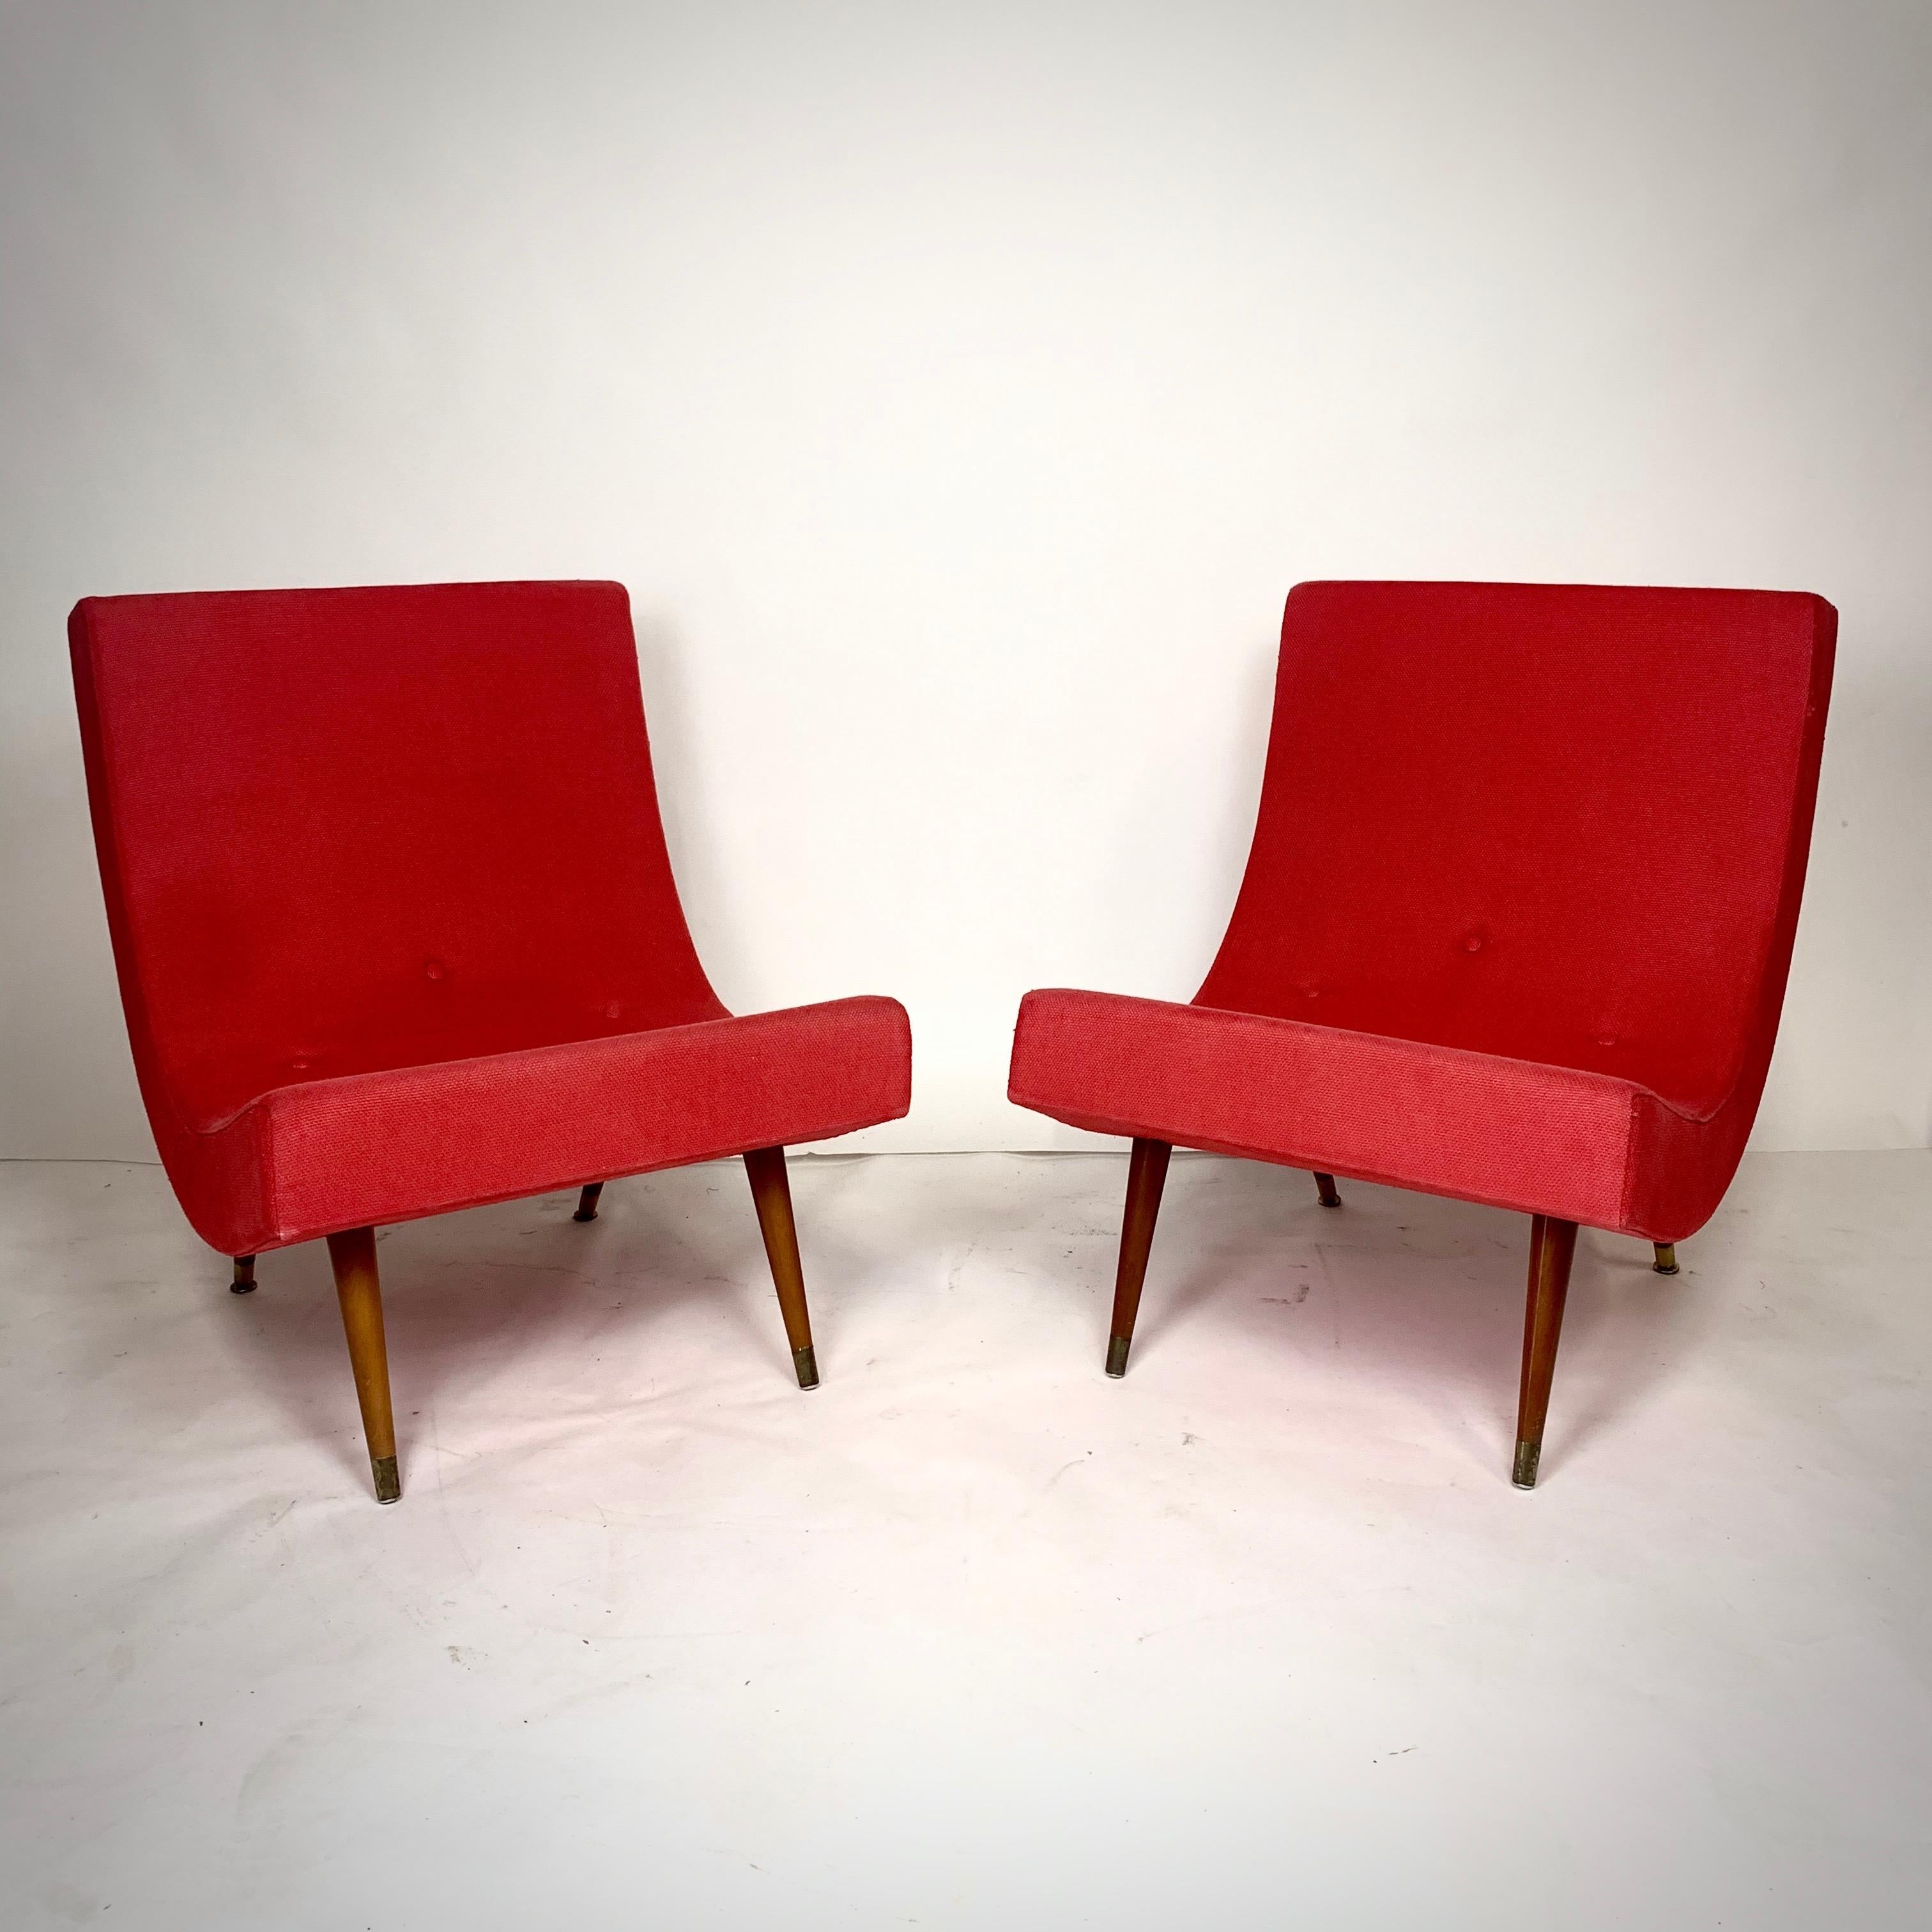 Pair of Adrian Pearsall Attributed Mid-Century Modern Red Scoop Lounge Chairs 8